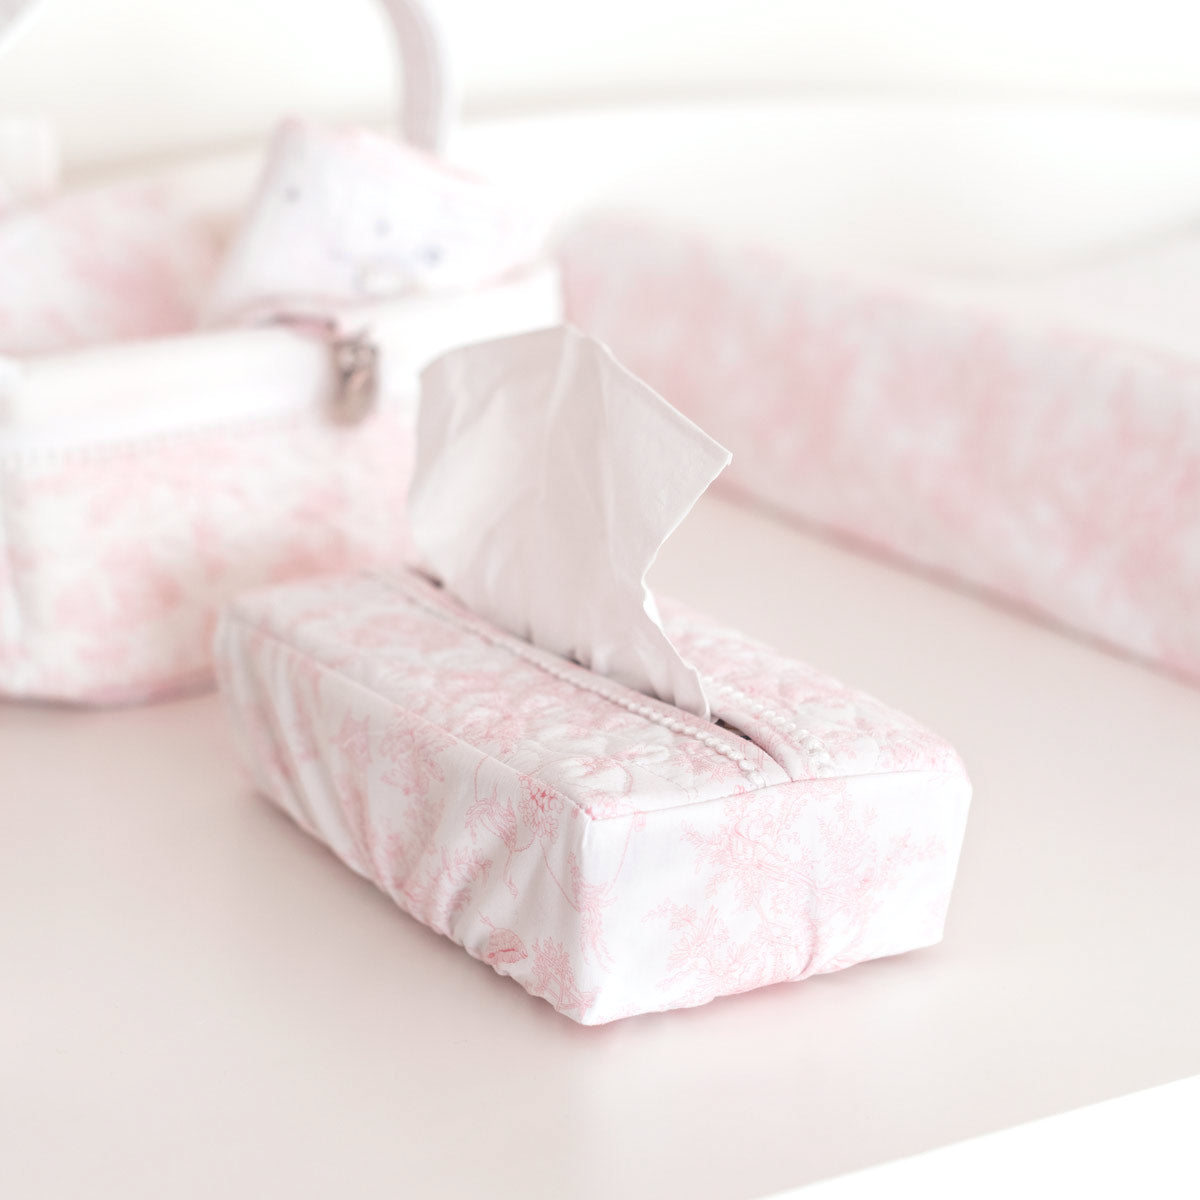 Theophile & Patachou Tissue Cover - Sweat Pink